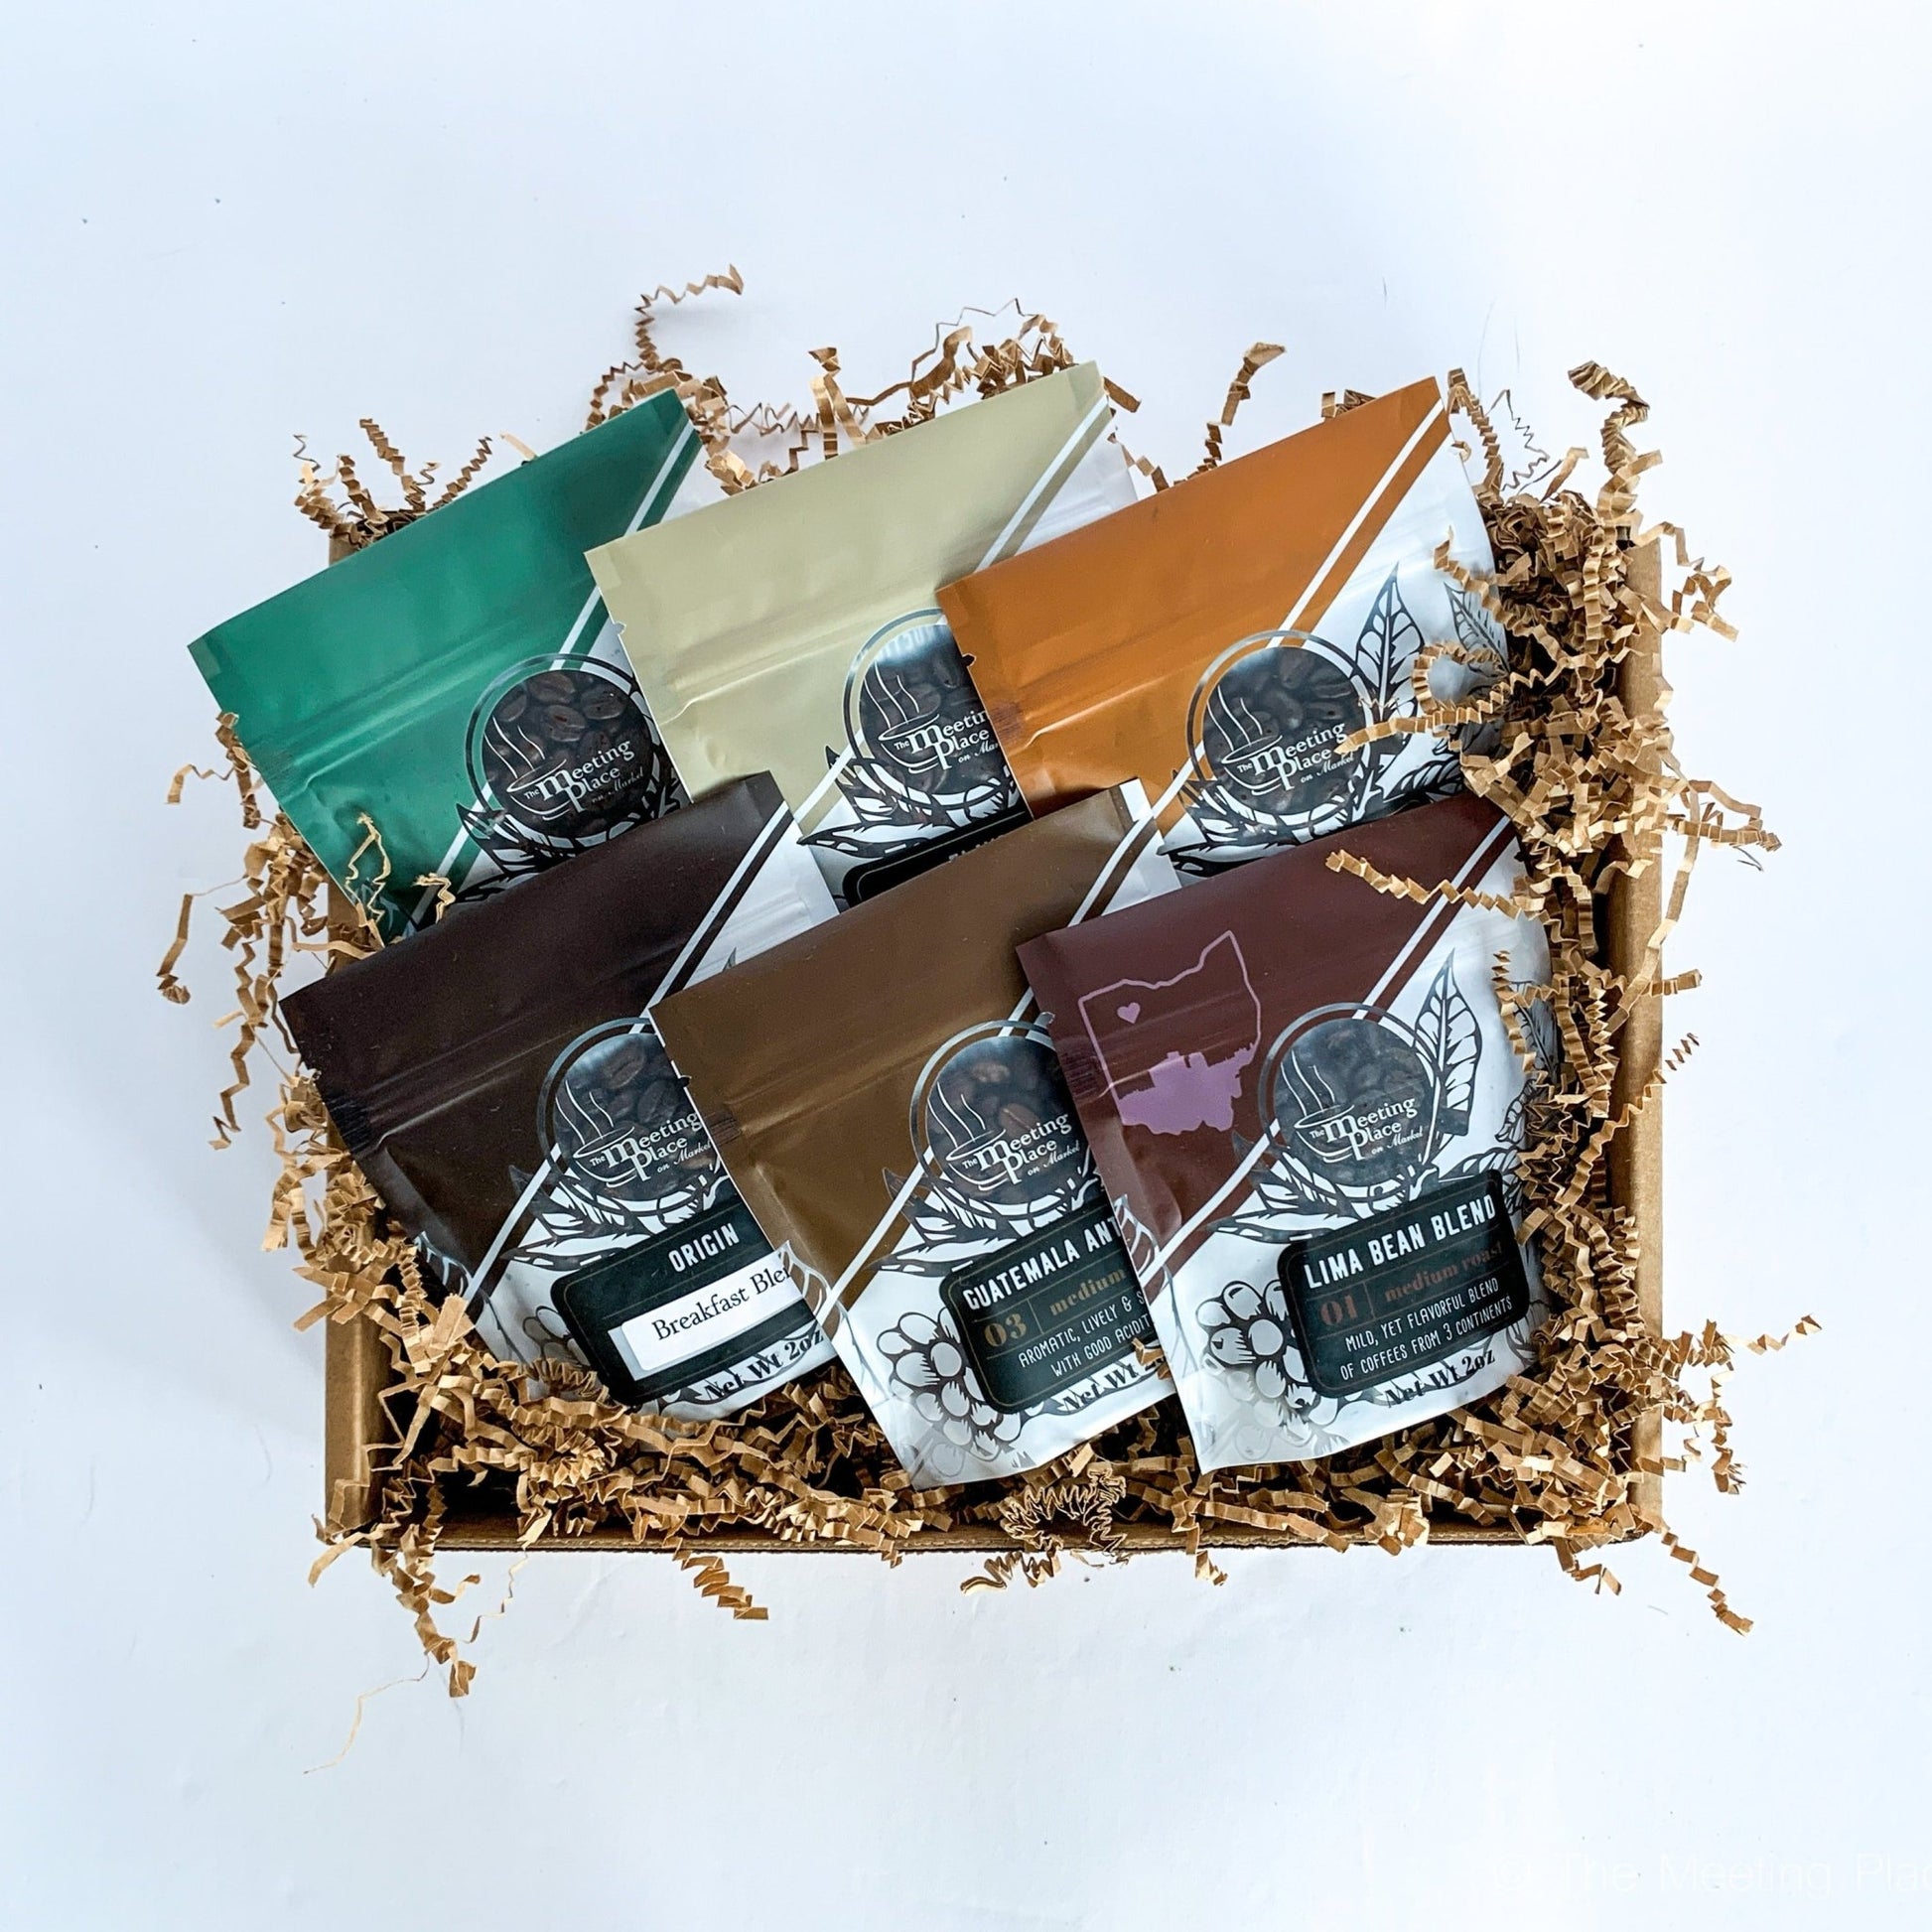 Coffee Around the World Sampler Variety Gift Set Corporate Gift Baskets - The Meeting Place on Market